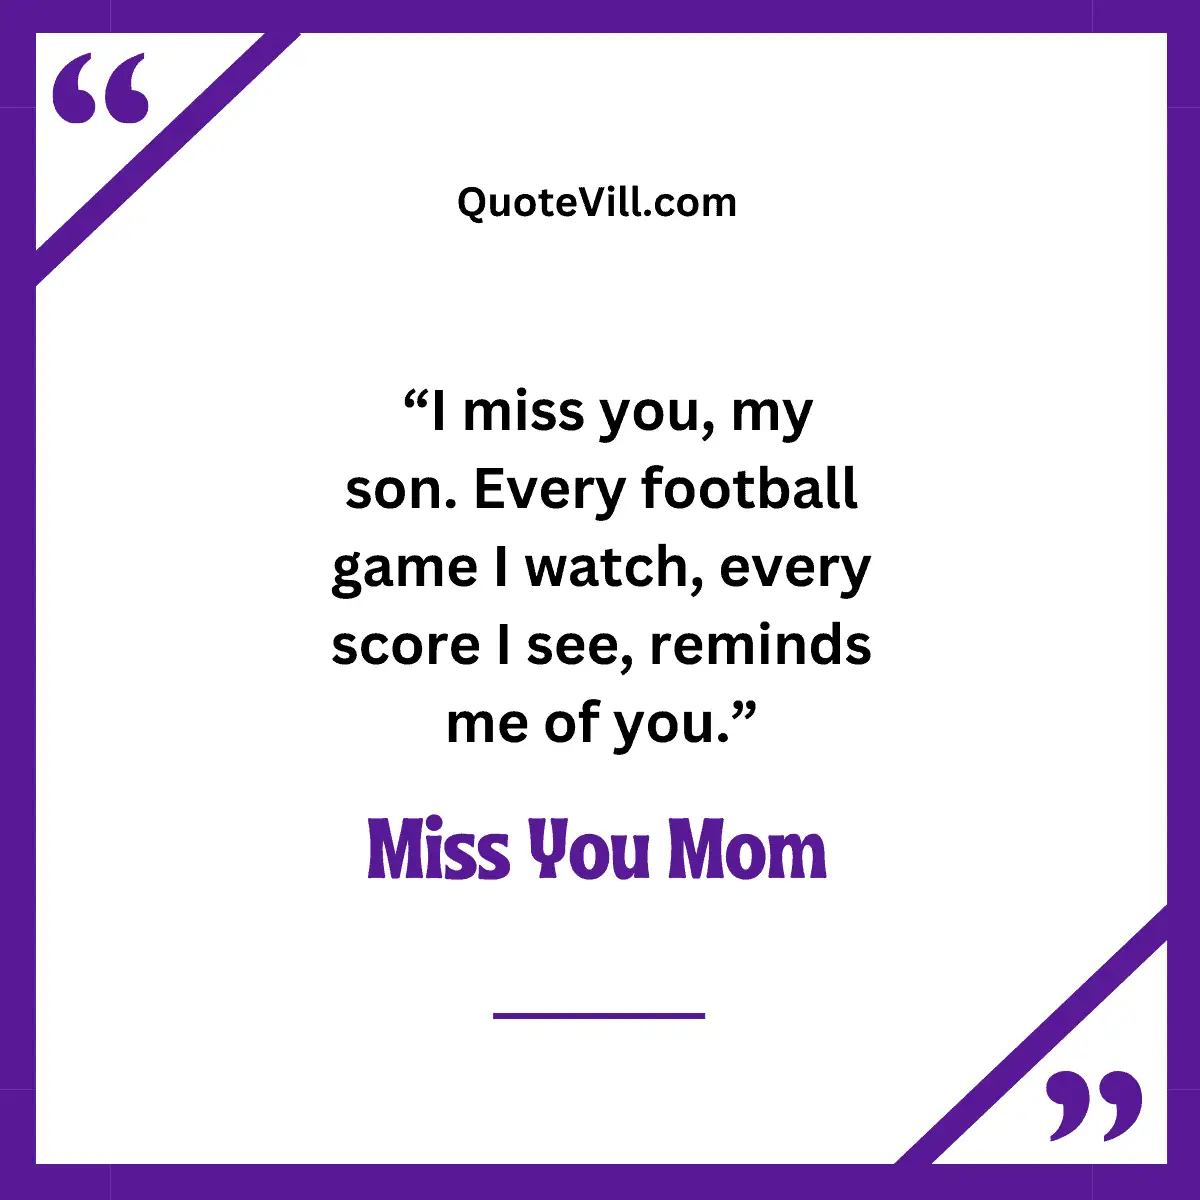 I miss you, my son. Every football game I watch, every score I see, reminds me of you.